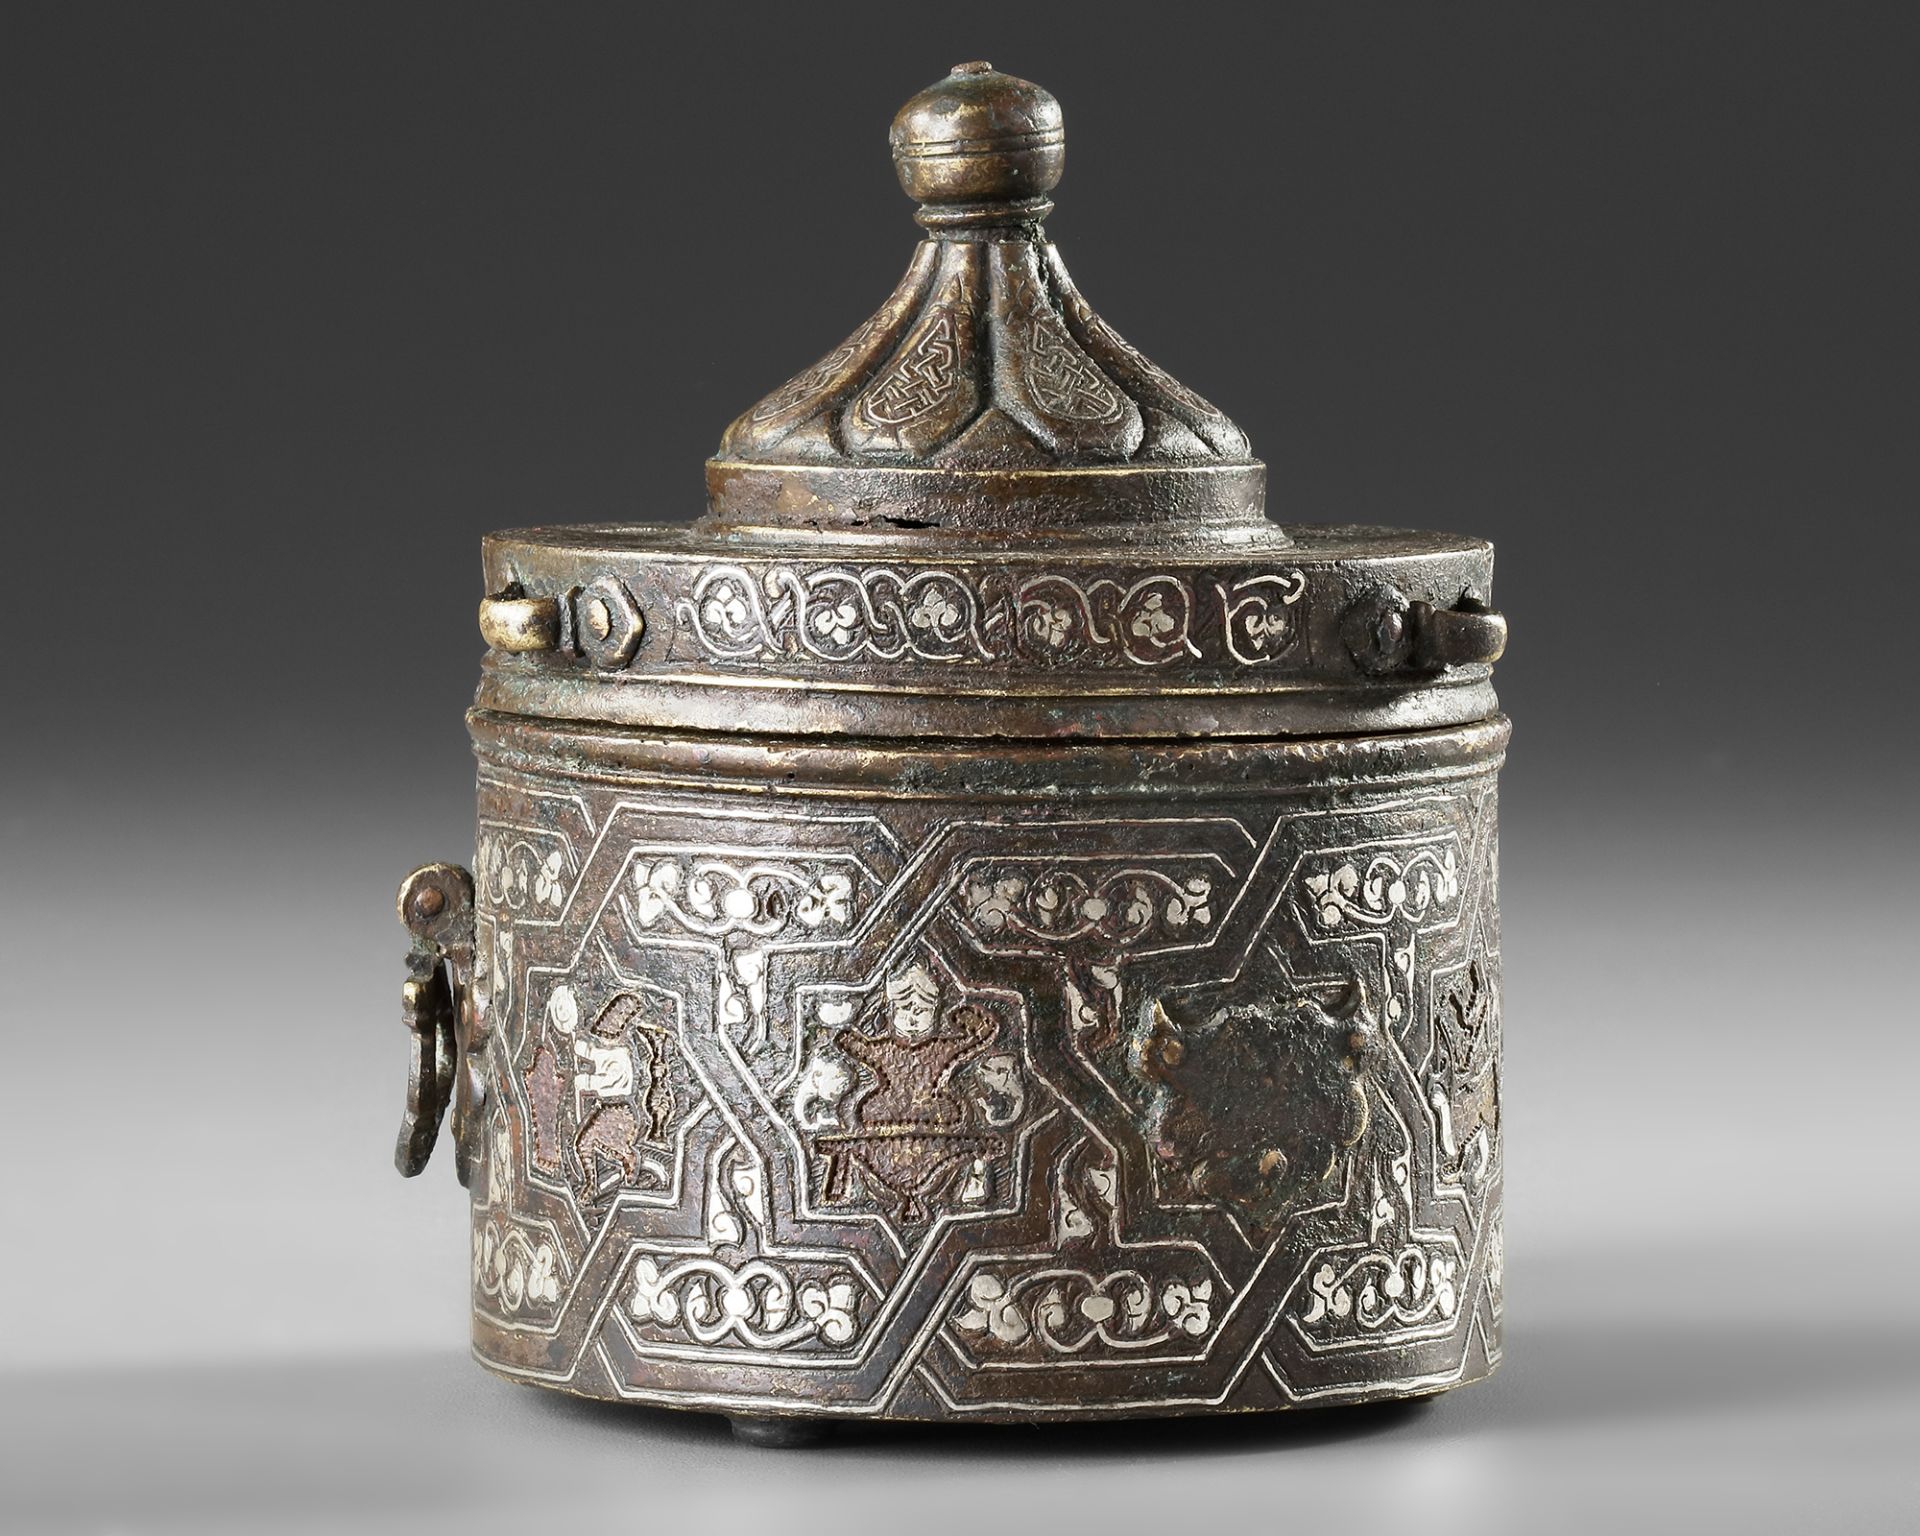 A FINE BRONZE INKWELL WITH A DOMED LID, KHORASAN, PERSIA, EARLY 13TH CENTURY - Image 2 of 8